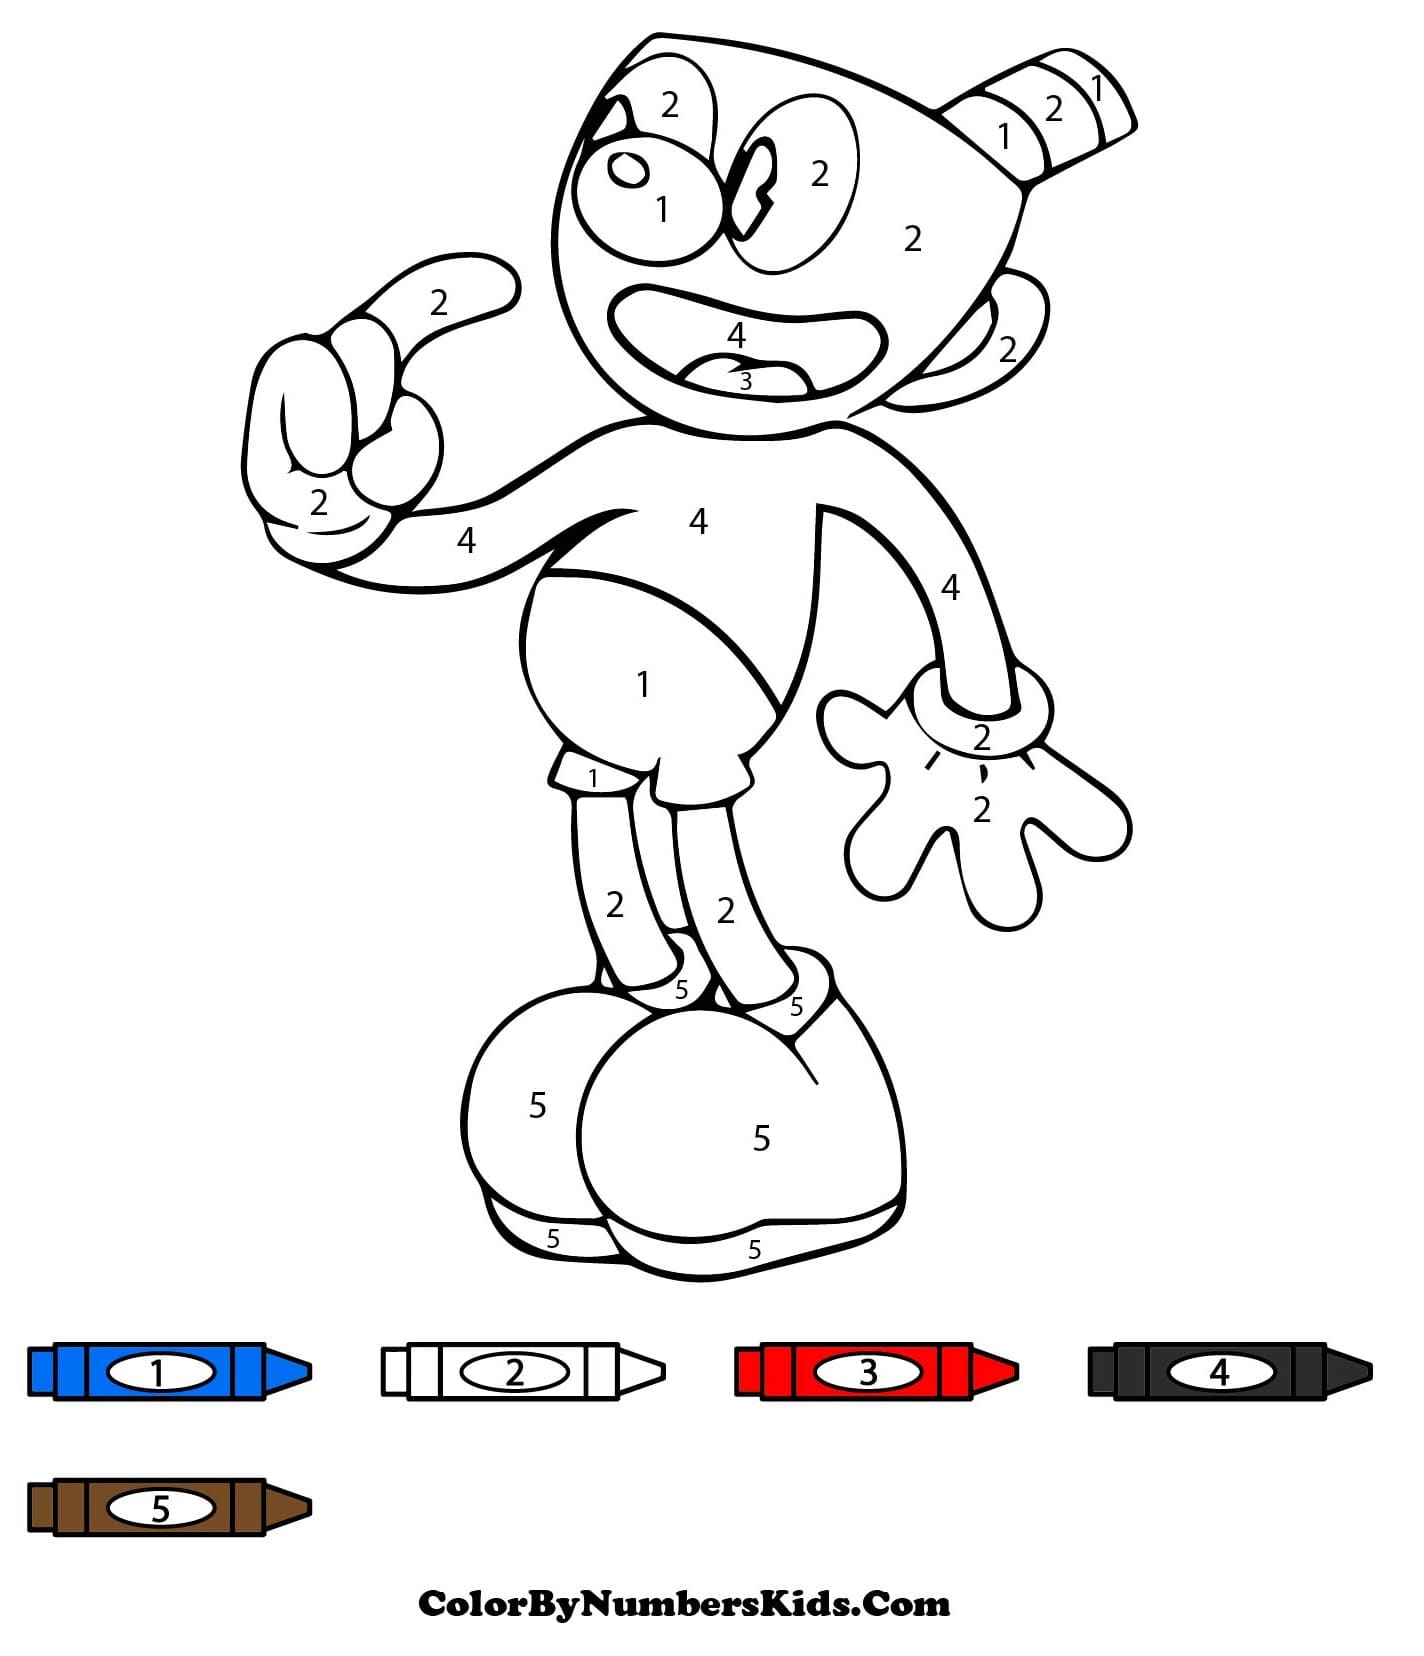 Mugman in Cuphead Color By Number